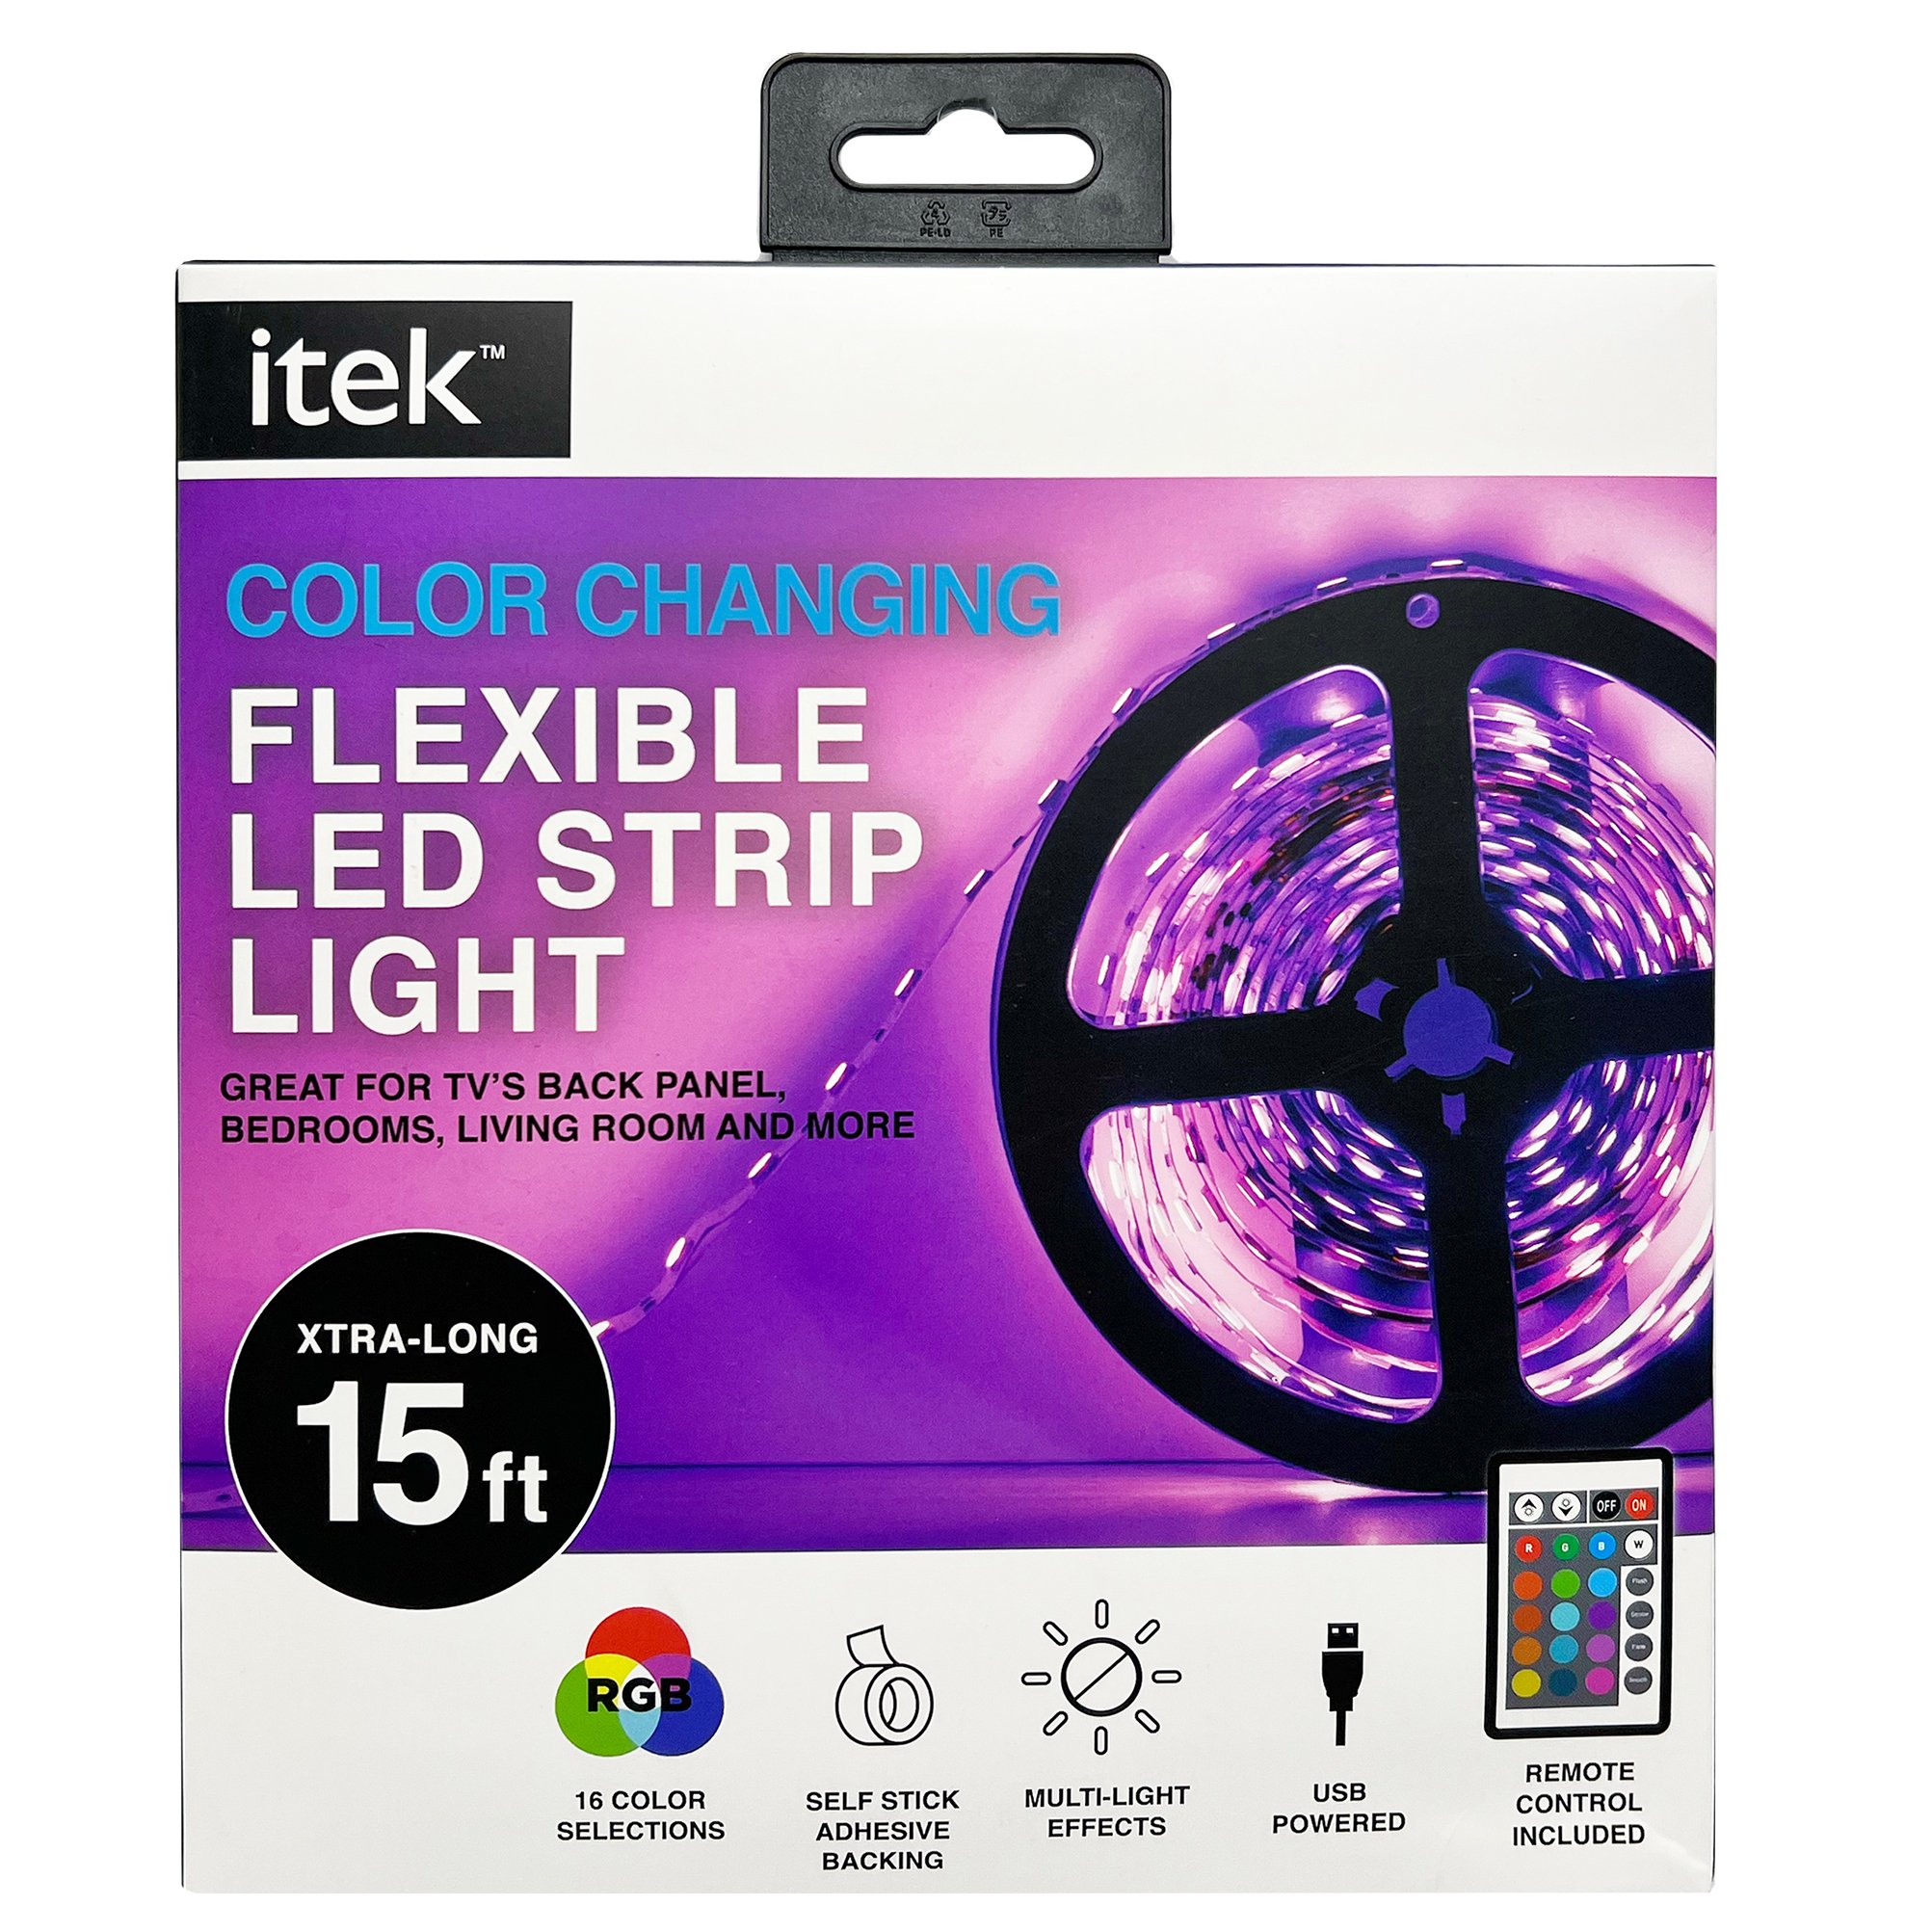 Bendable Light Strip Puts Light Where You Need It - Quilting Digest